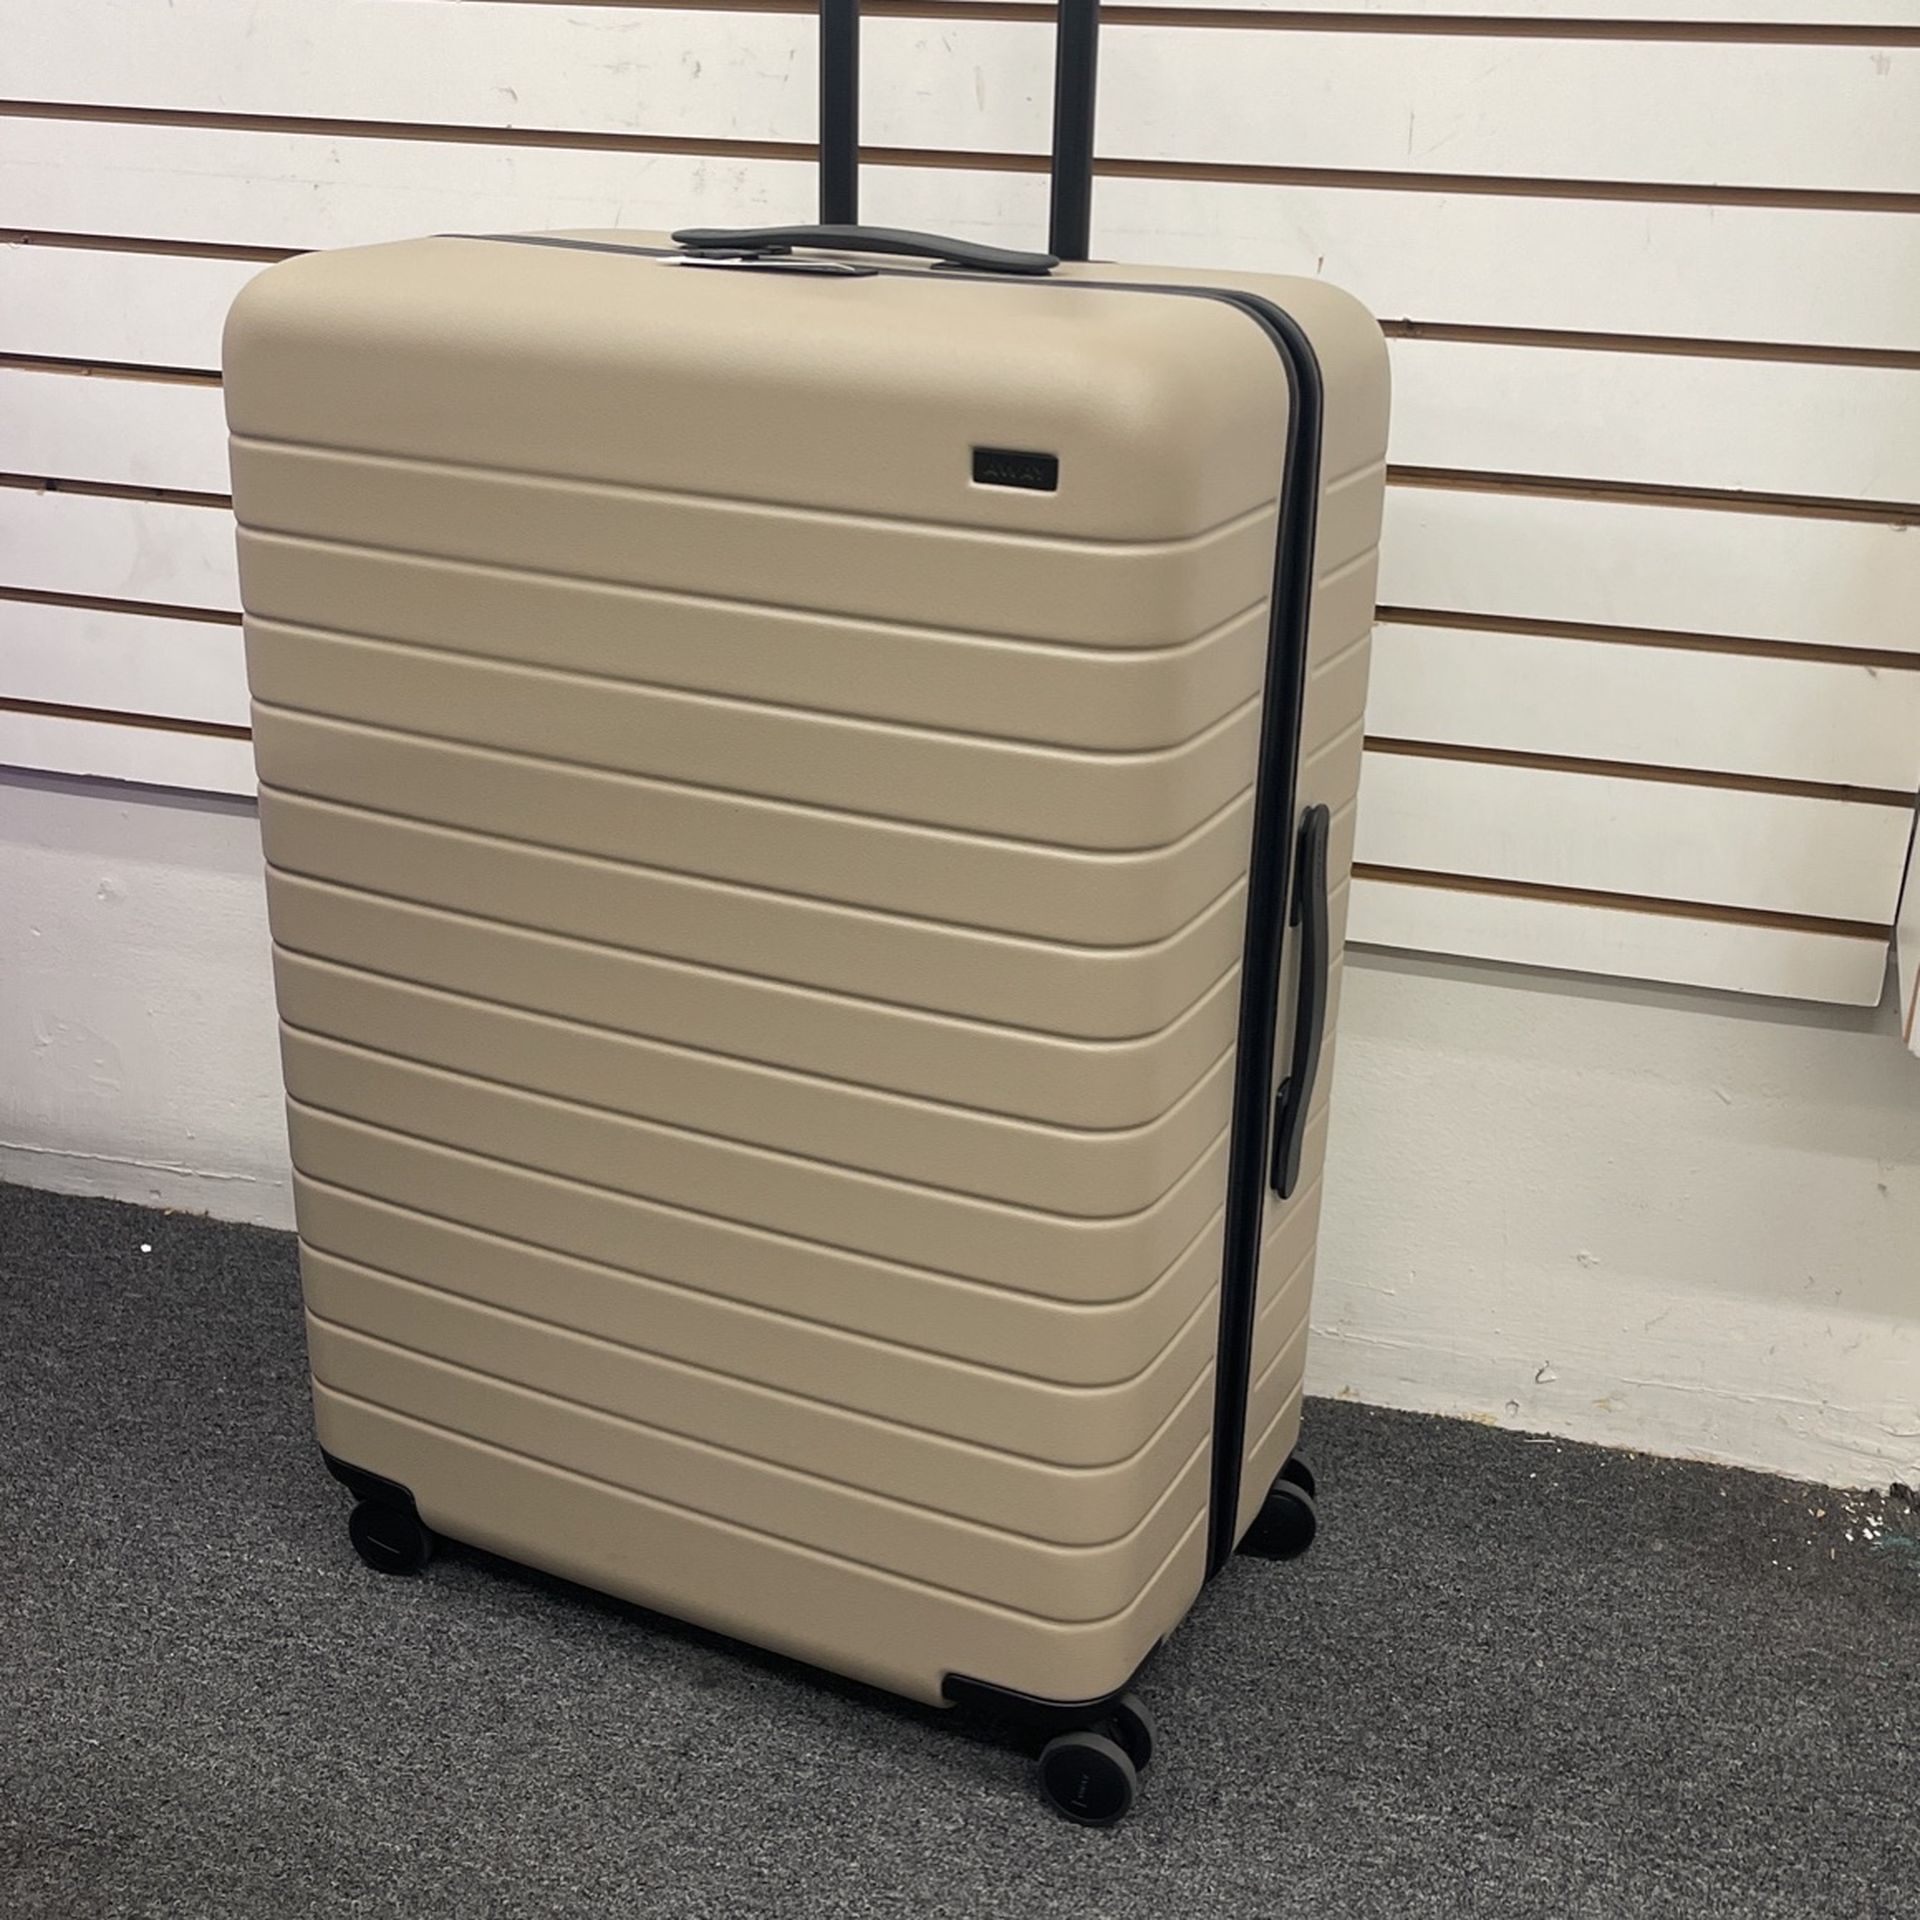 Luggage Away New Sand Beige Large 28 TSA Lock High Quality Hard Case Trave  Bag for Sale in Los Angeles, CA - OfferUp